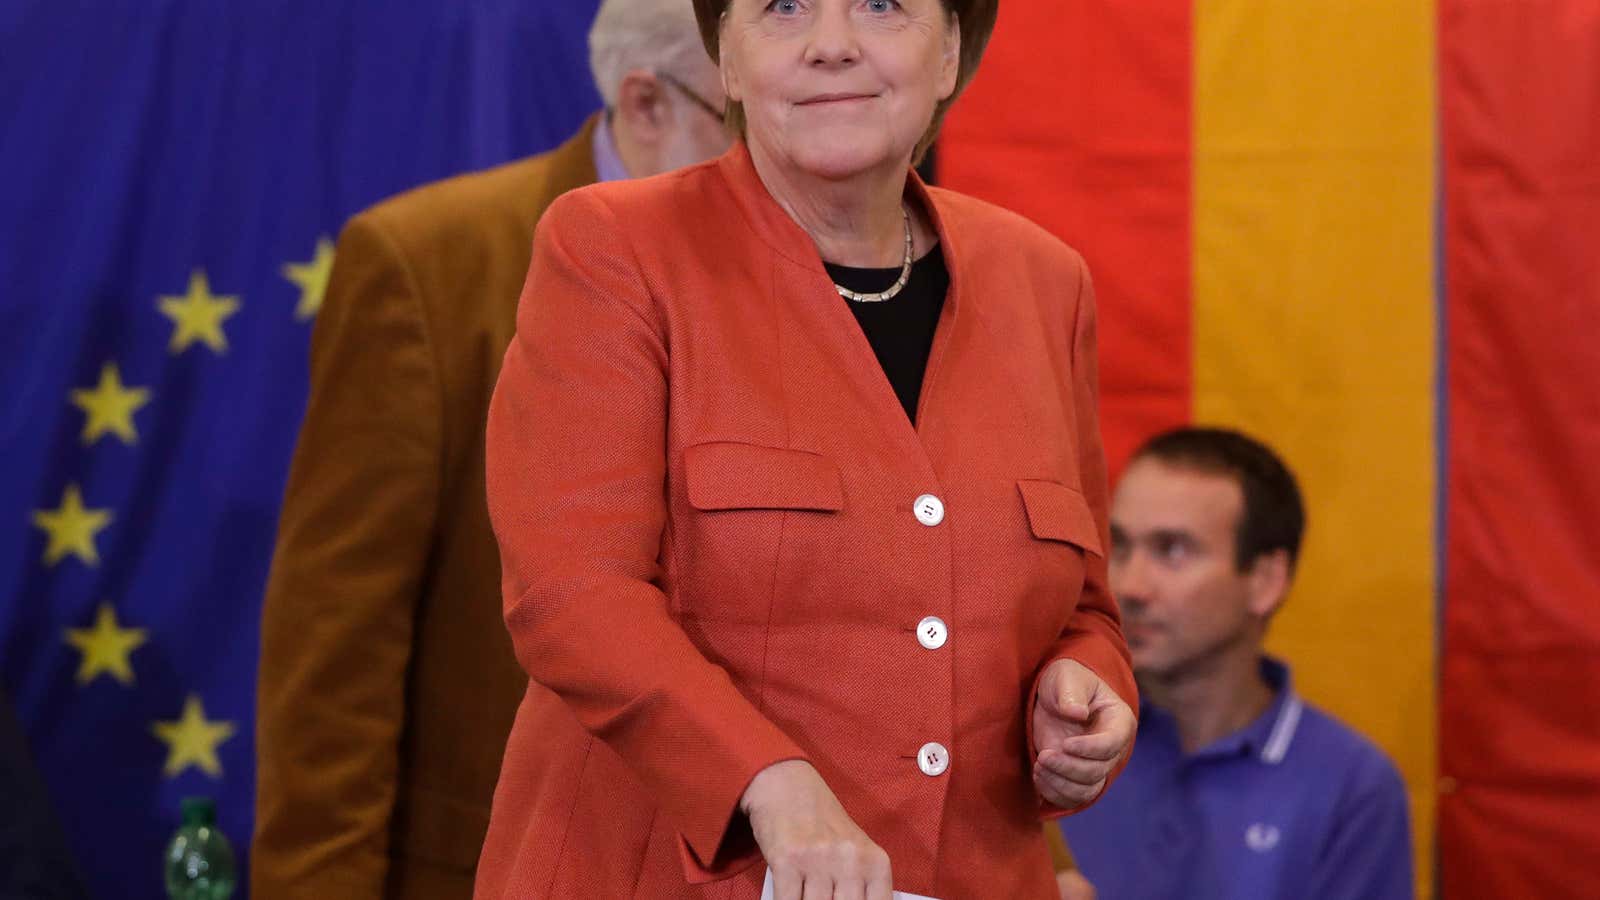 Merkel marches to victory